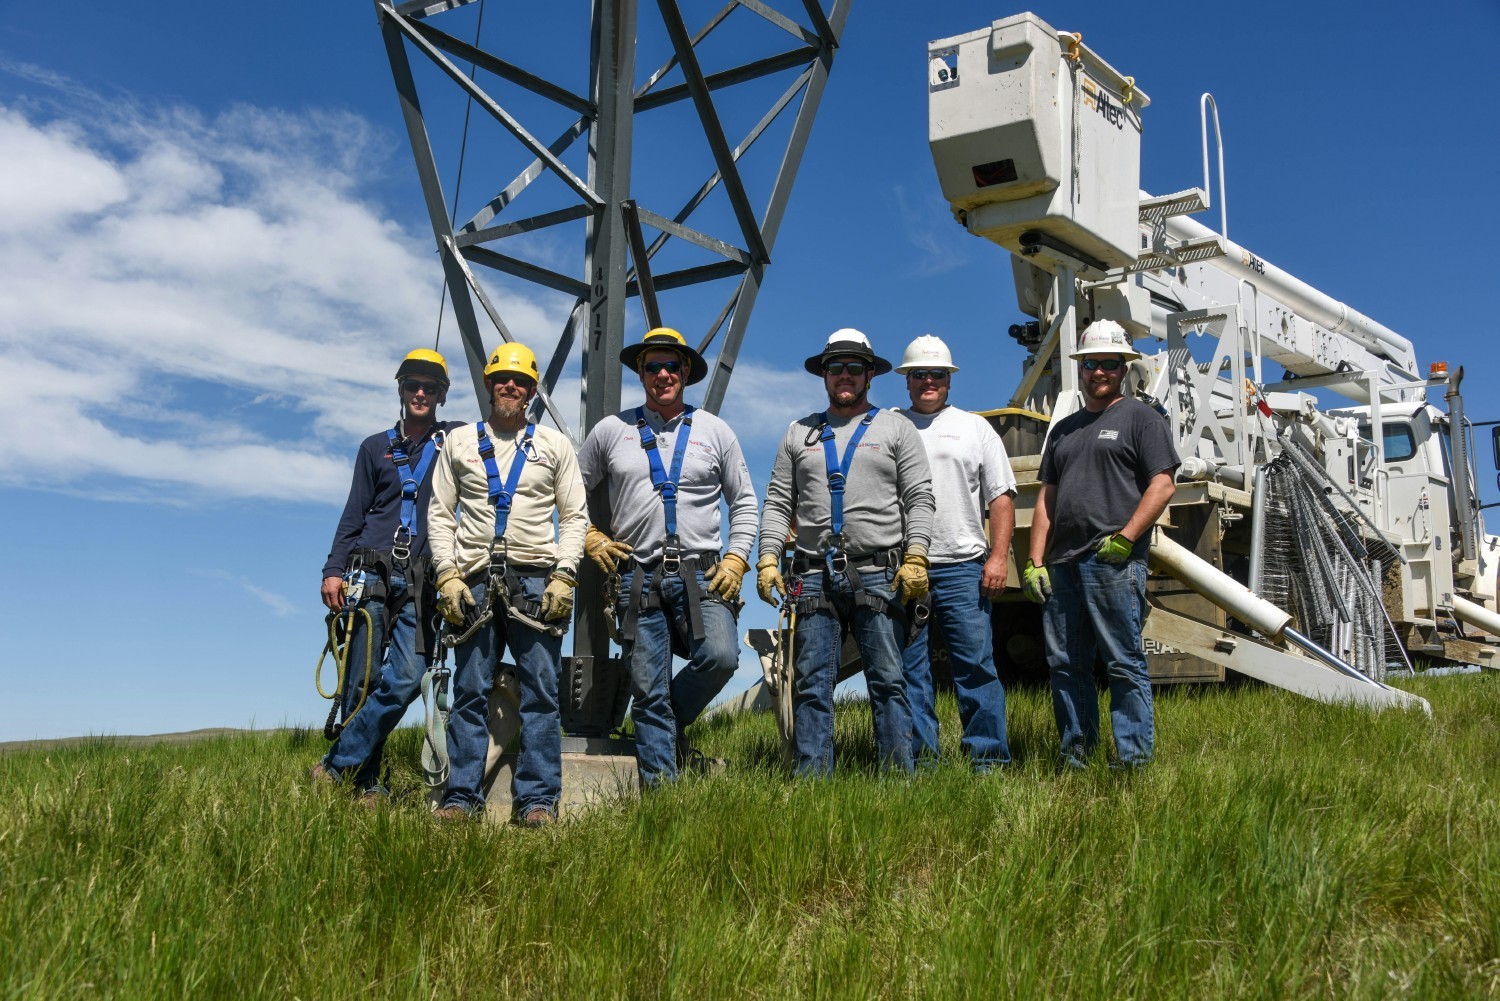 A group of line workers prepares to install bird deterrents on a power line in central Montana.